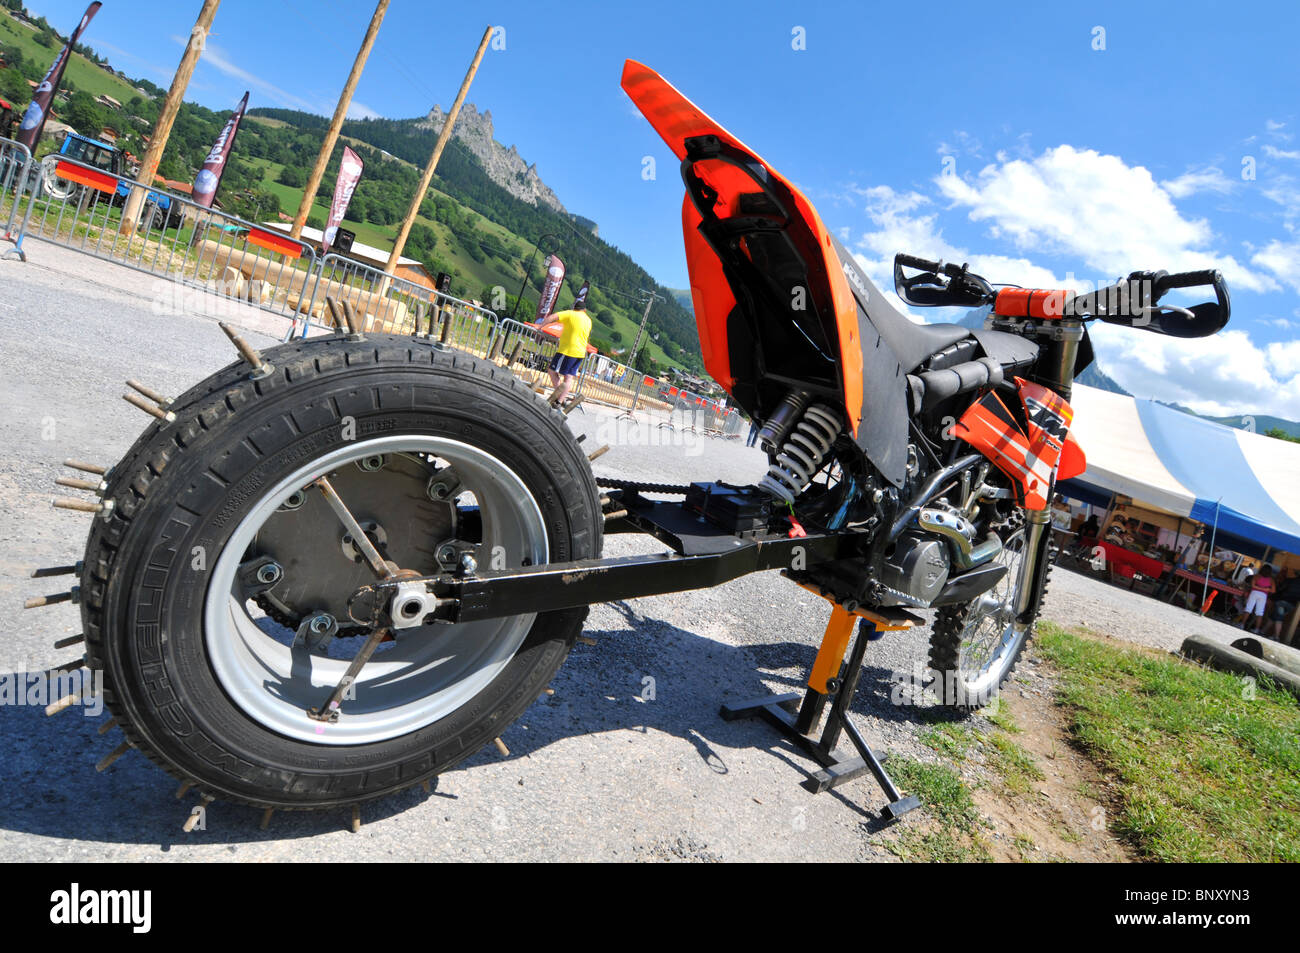 Motorbike used in the sport of hill climbing, hill climbing motorcycle  Stock Photo - Alamy